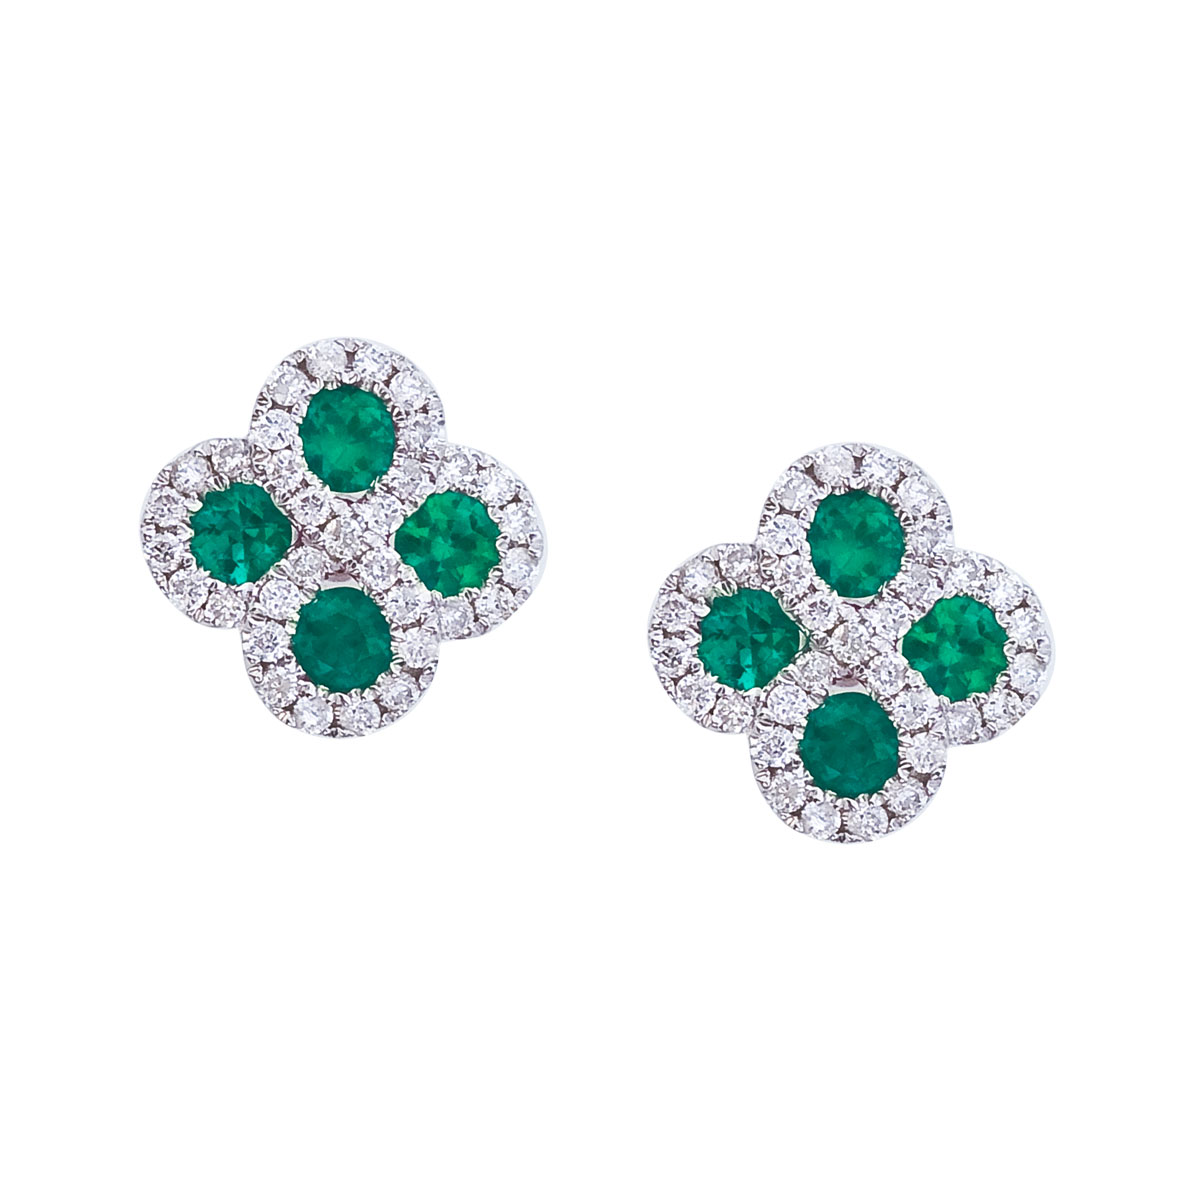 JCX2091: Beautiful clover shaped earrings with 2.7 mm emeralds surrounded by gleaming diamonds.